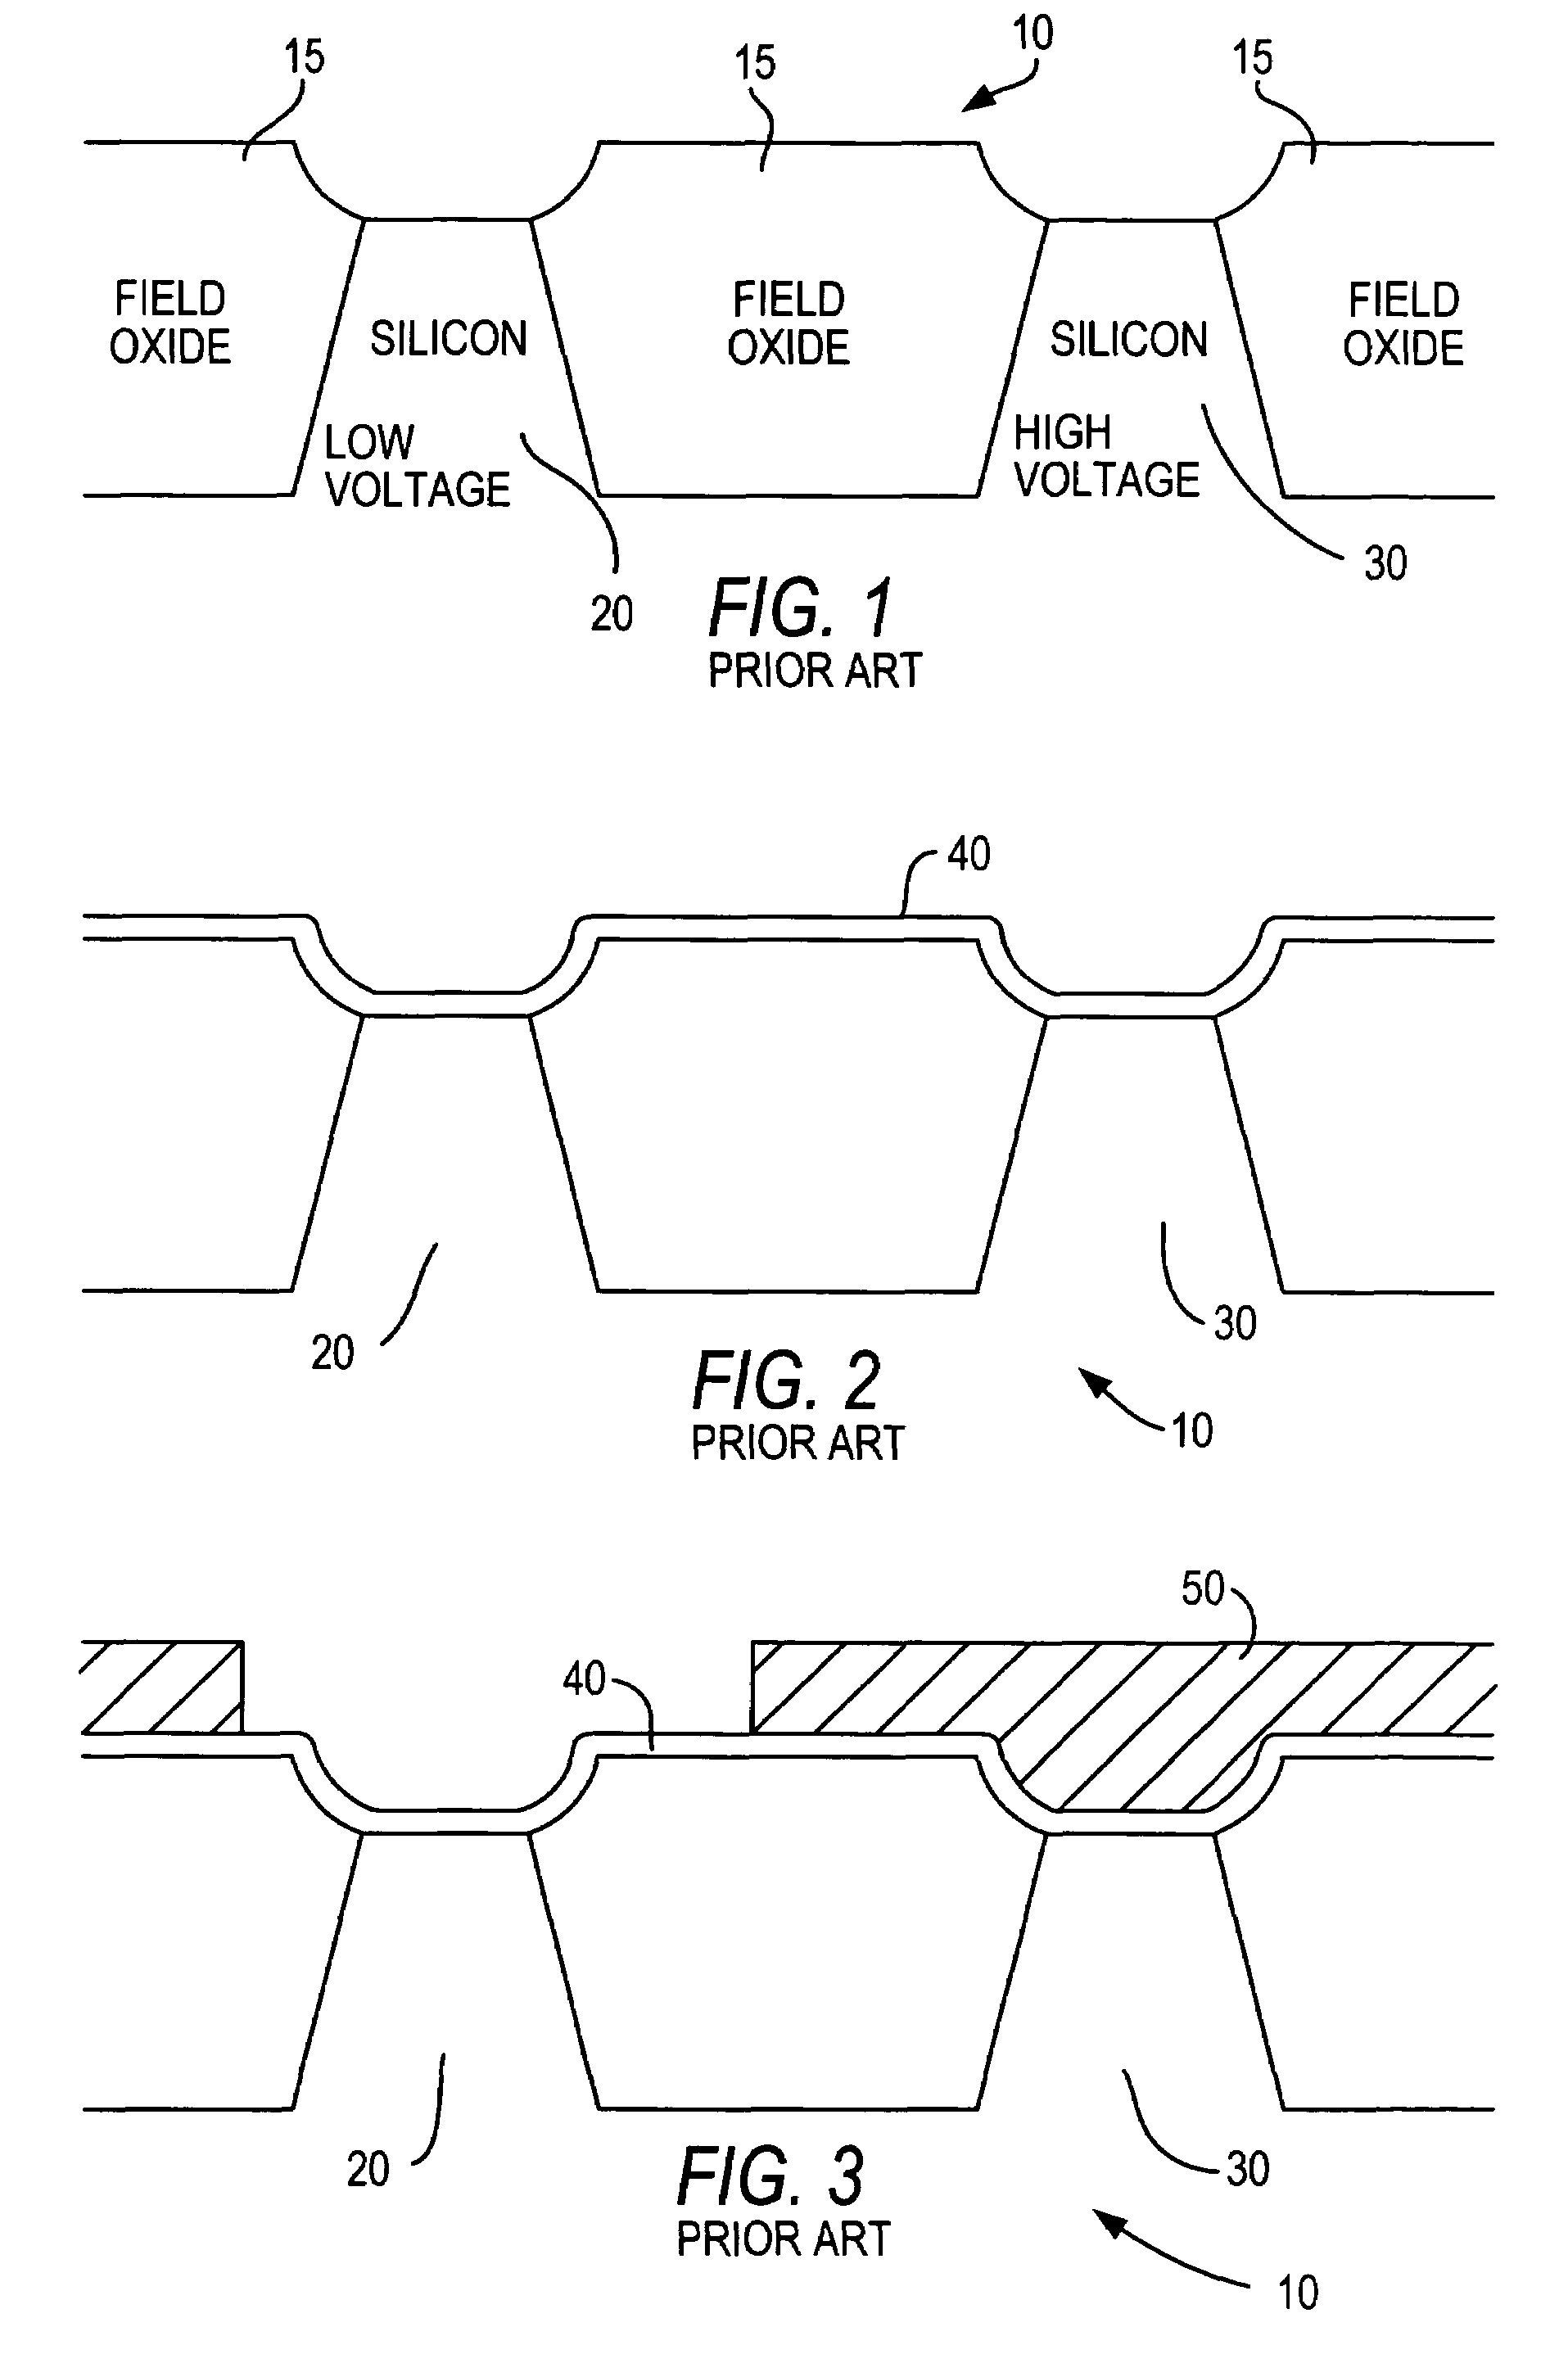 Reduction of field edge thinning in peripheral devices